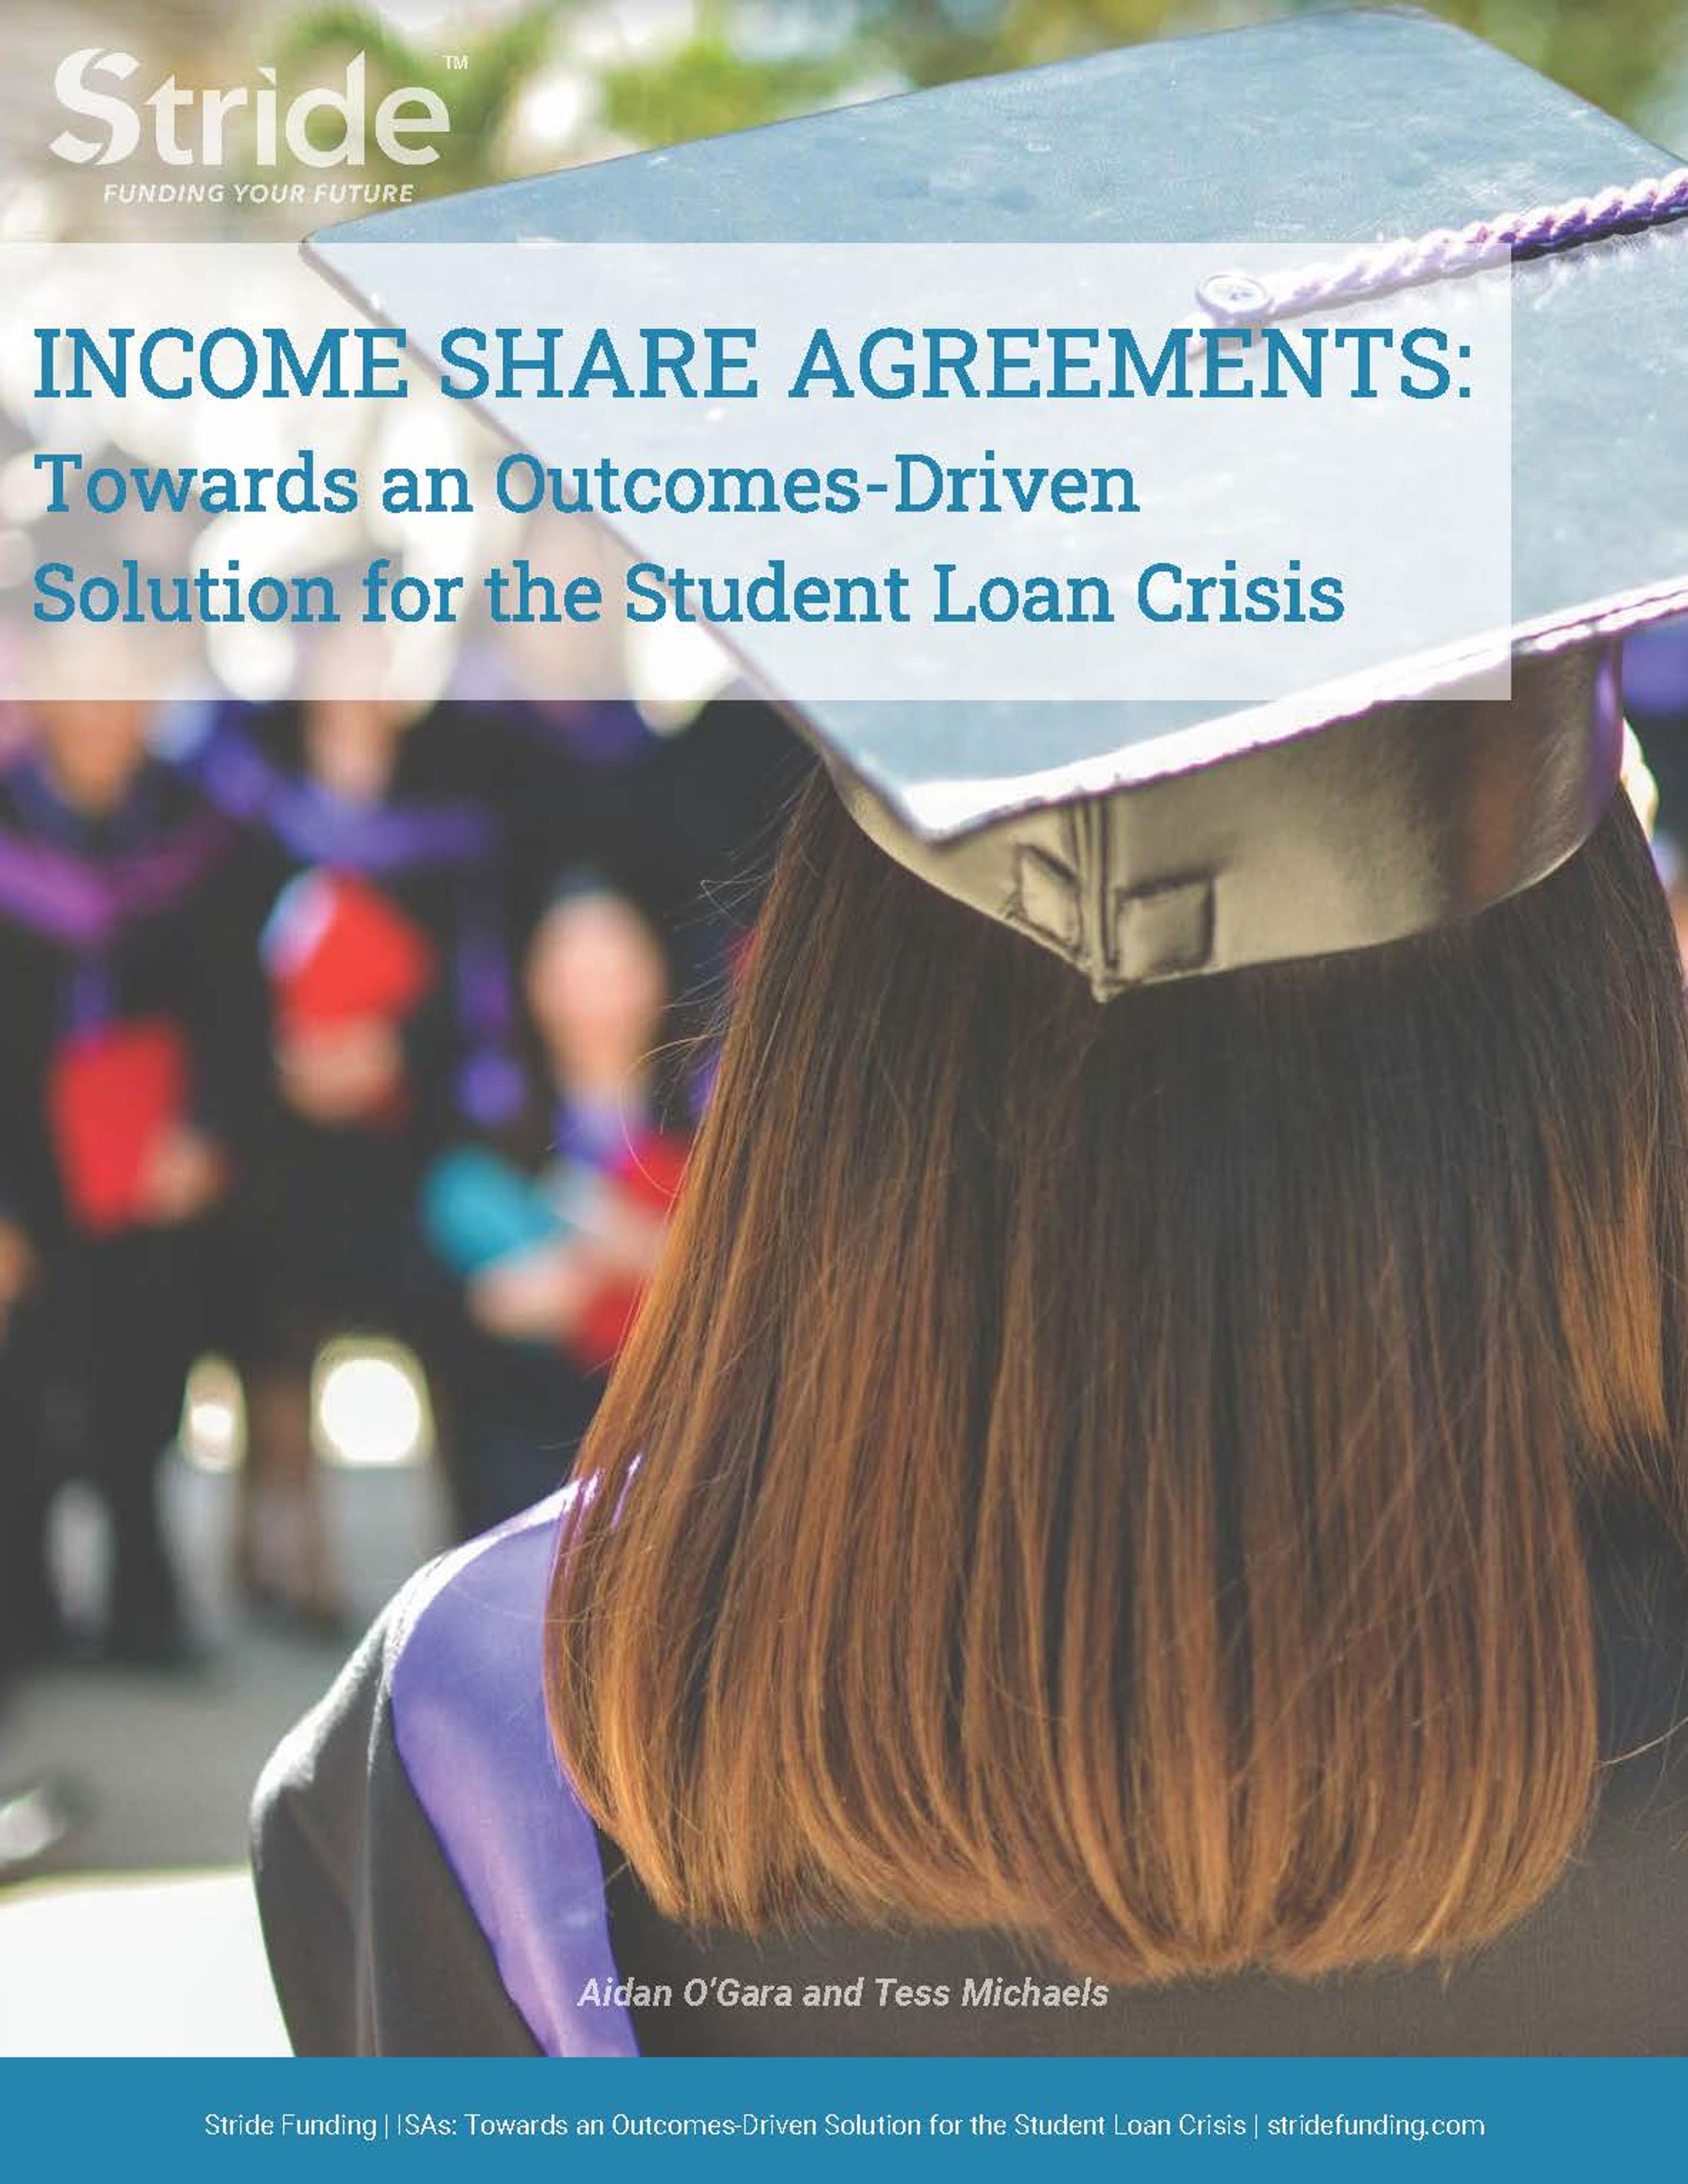 Cover of whitepaper titled "Income Share Agreements: Towards an Outcomes-Driven Solution  for the Student Loan Crisis"